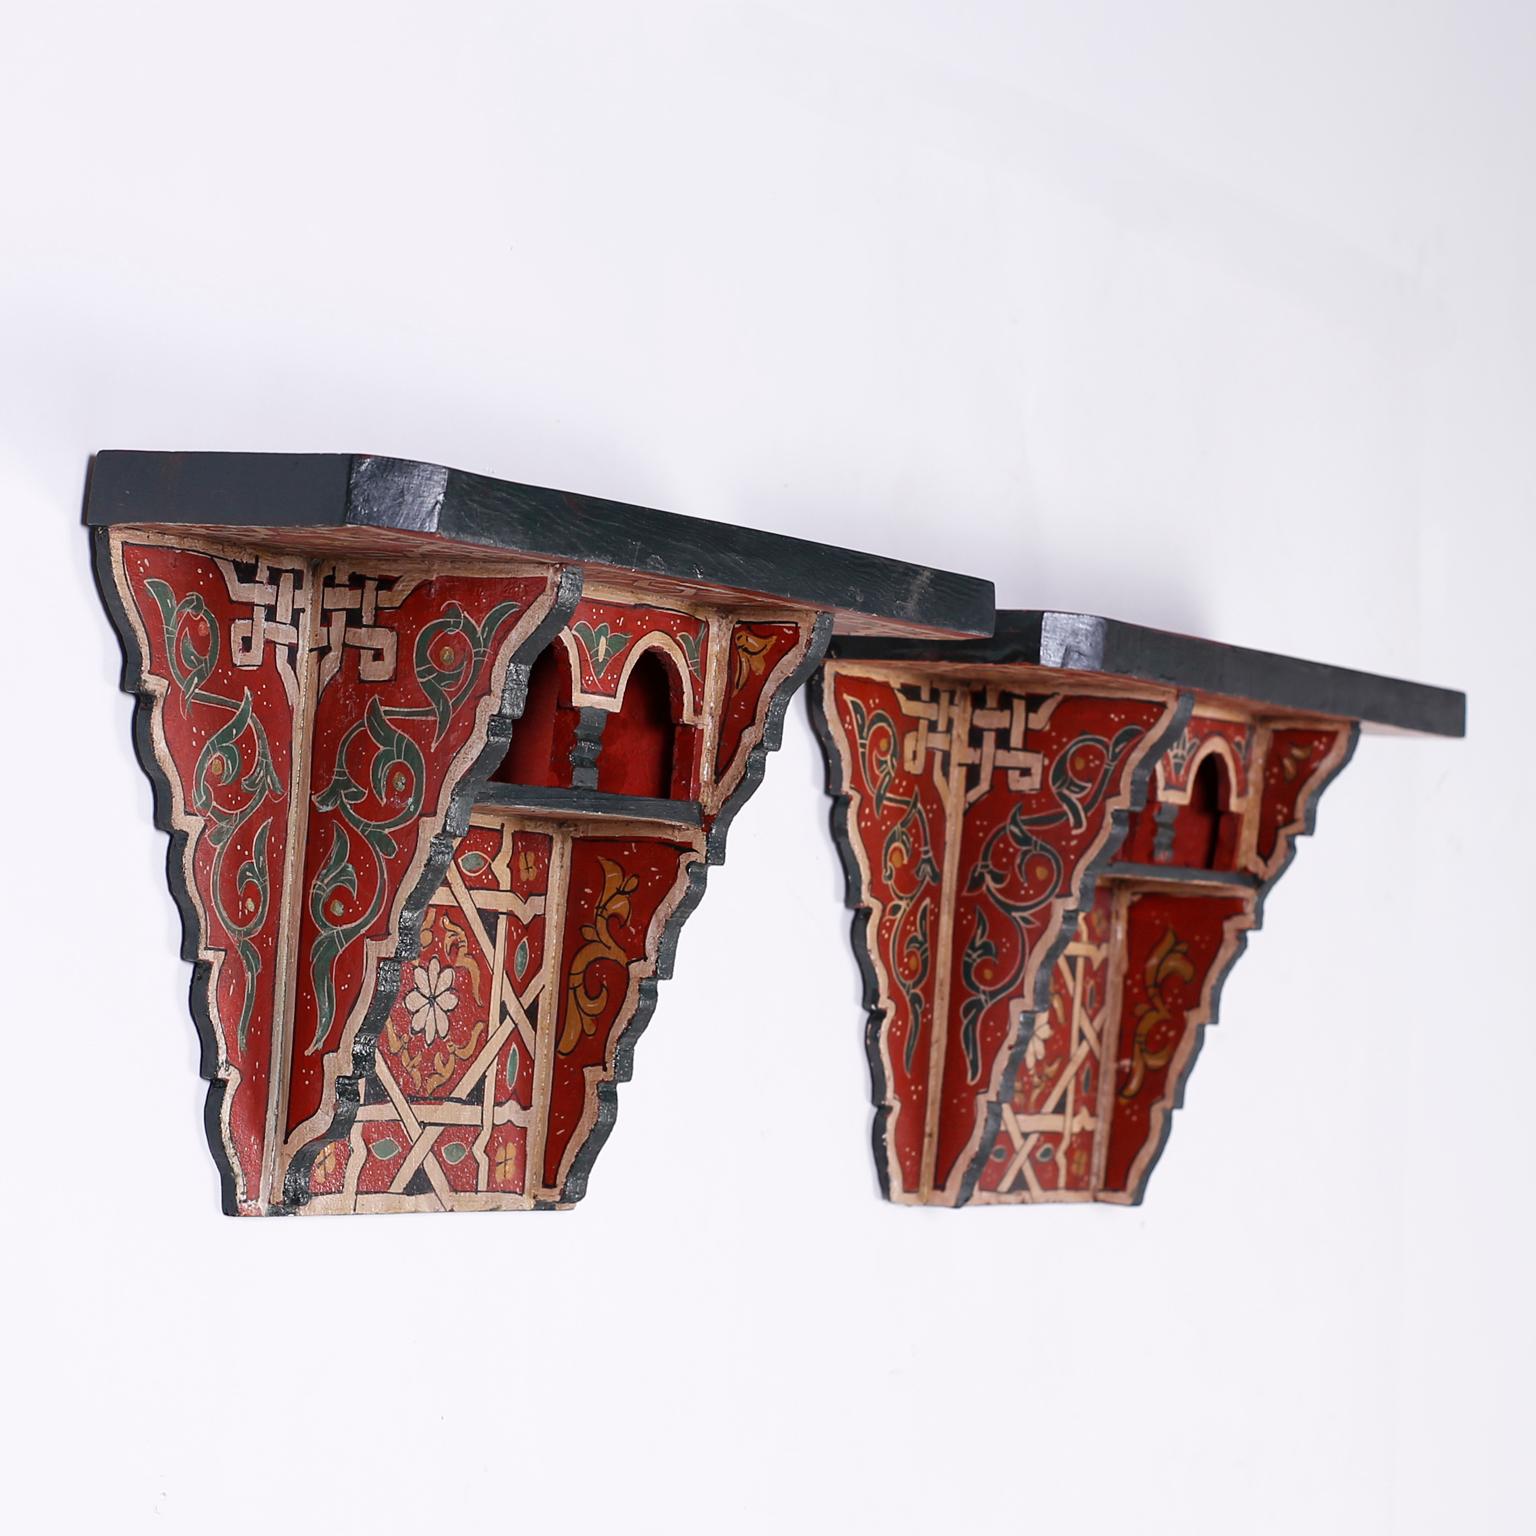 Pair of Moroccan wall shelves crafted in wood with arched nooks and painted in distinctive Mediterranean rustic colors in floral and geometric designs.